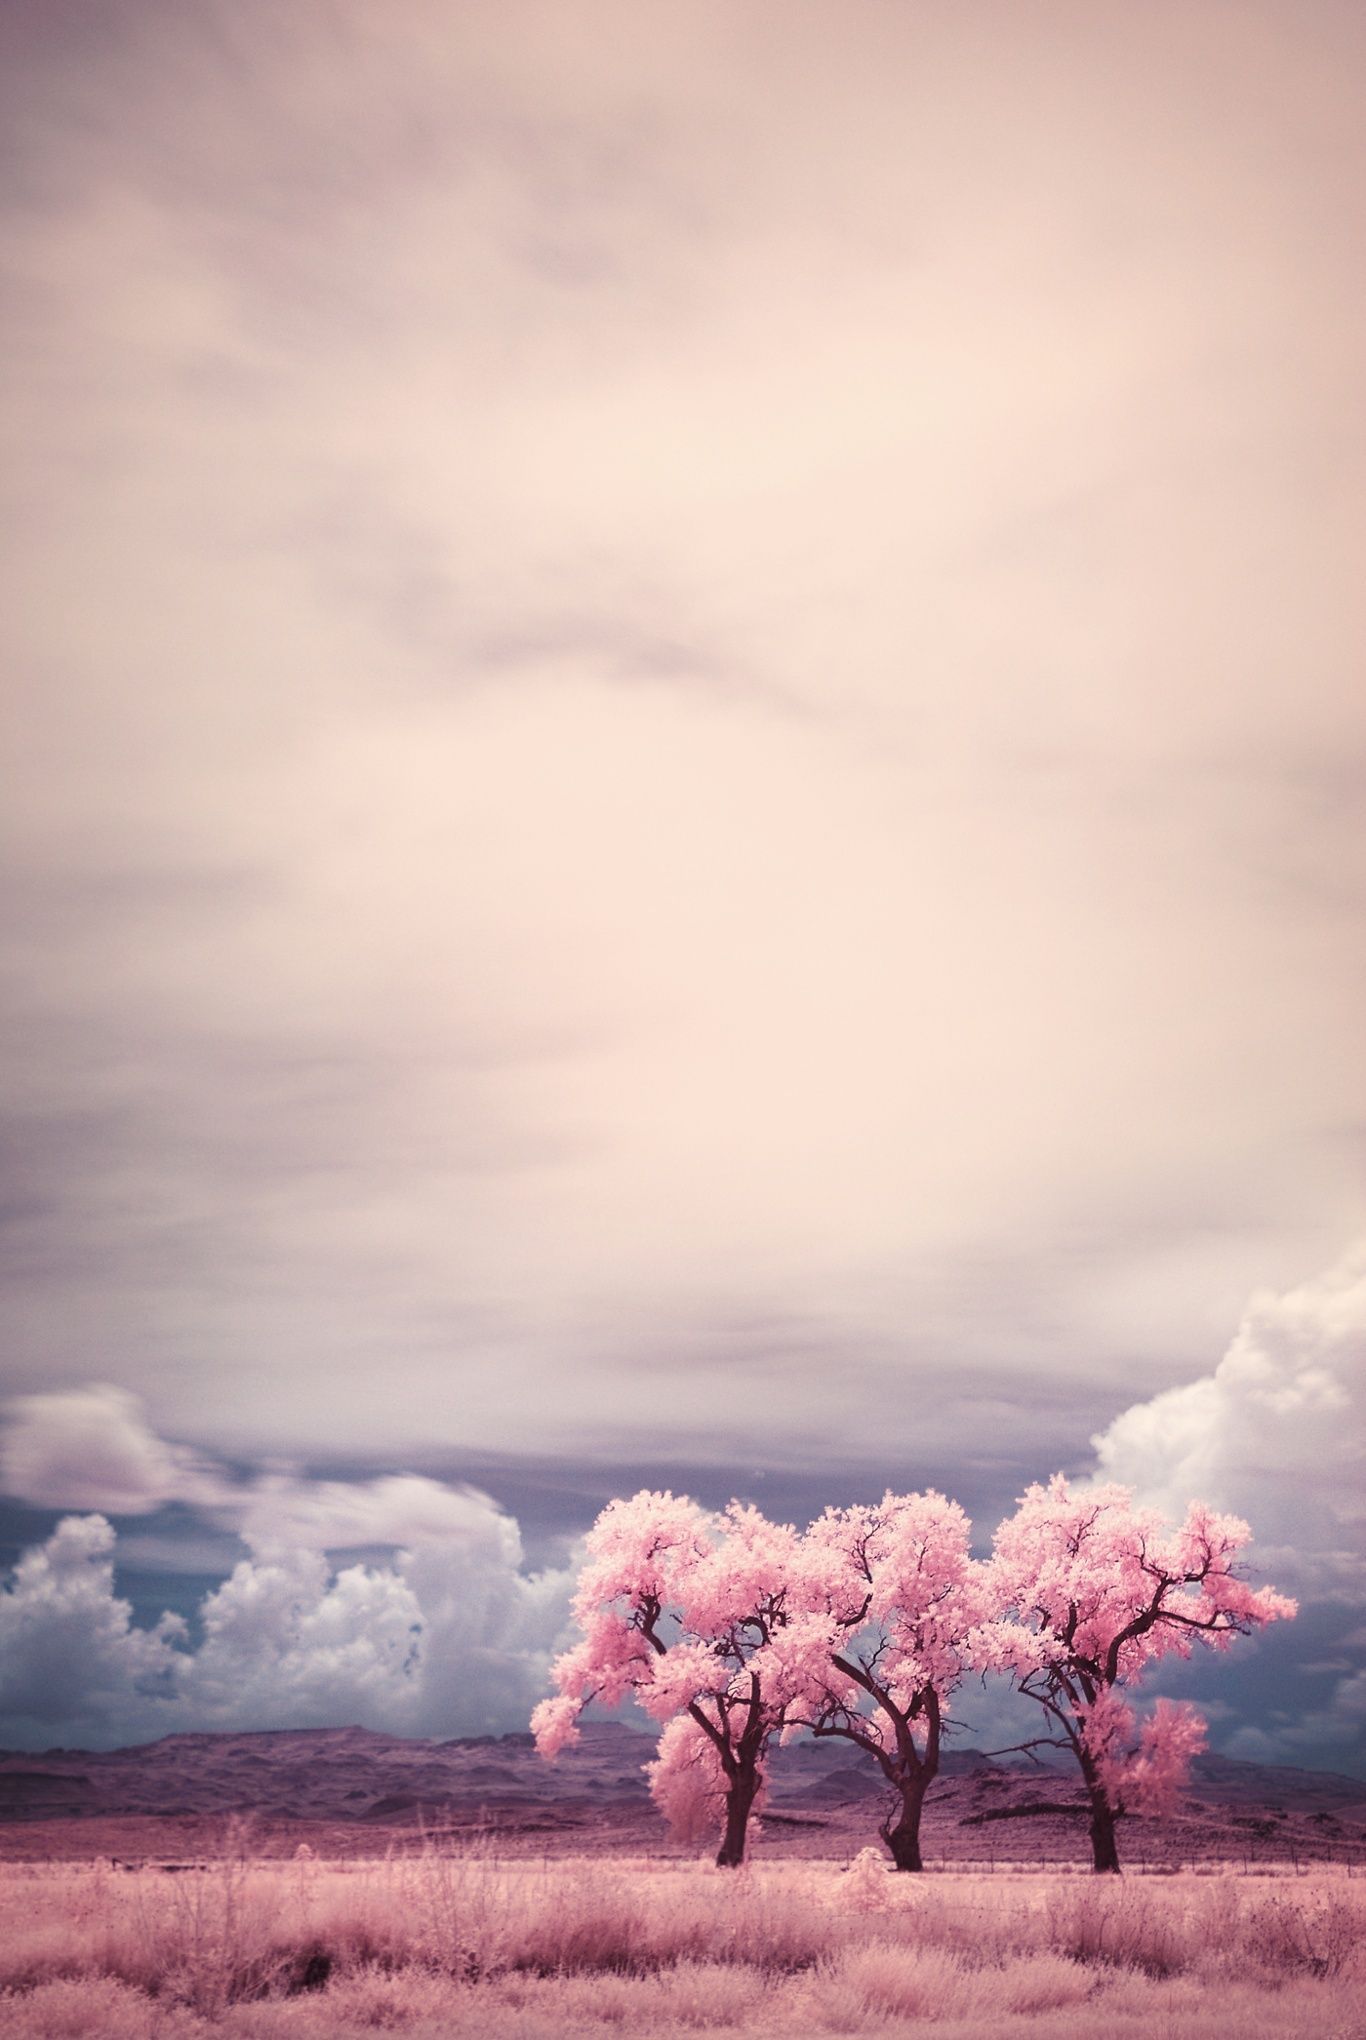 Pretty in pink: what spring looks like in infrared – in pictures - Pretty in pink: what spring looks like in infrared – in pictures -   4 beauty Pictures wallpaper ideas